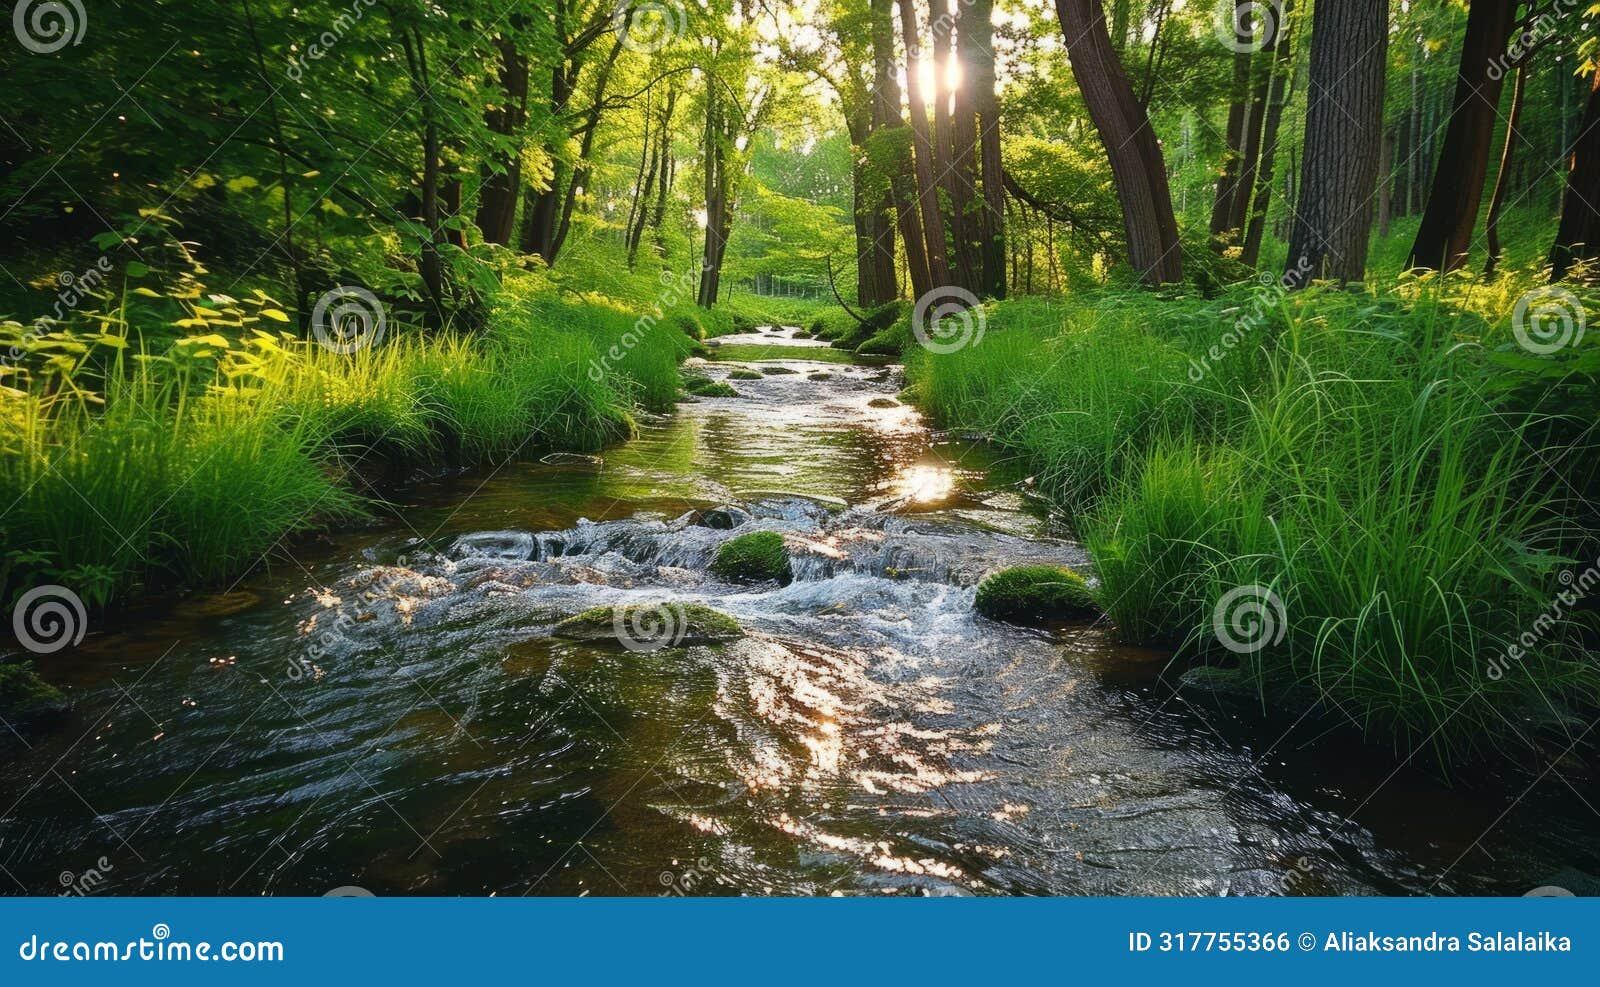 nature sounds, the serene trickle of a stream flowing through a vibrant forest creates a calming backdrop for relaxation